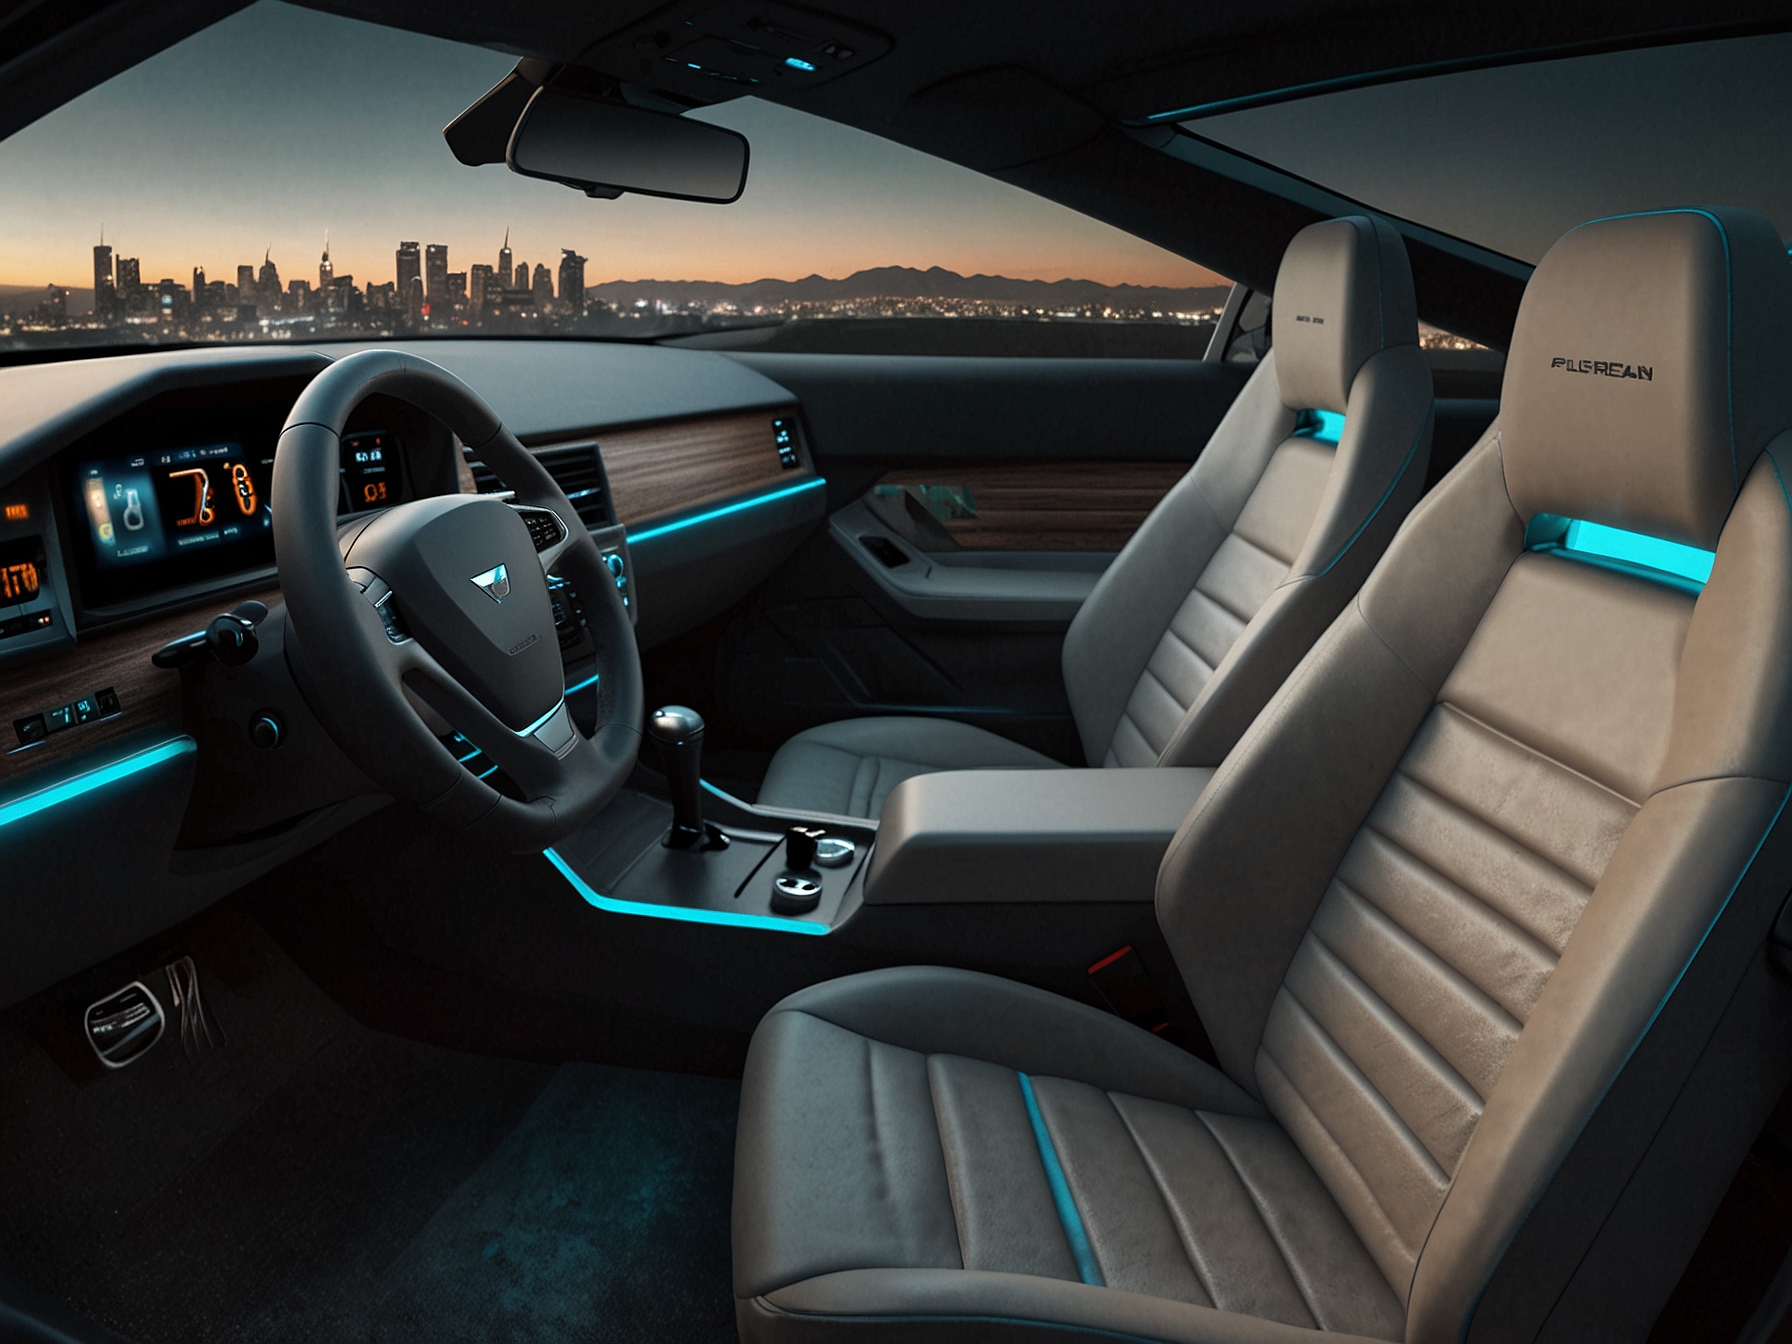 The interior of the new DeLorean EV, featuring advanced digital displays, state-of-the-art infotainment systems, and luxurious seating, blending classic design with modern technology.